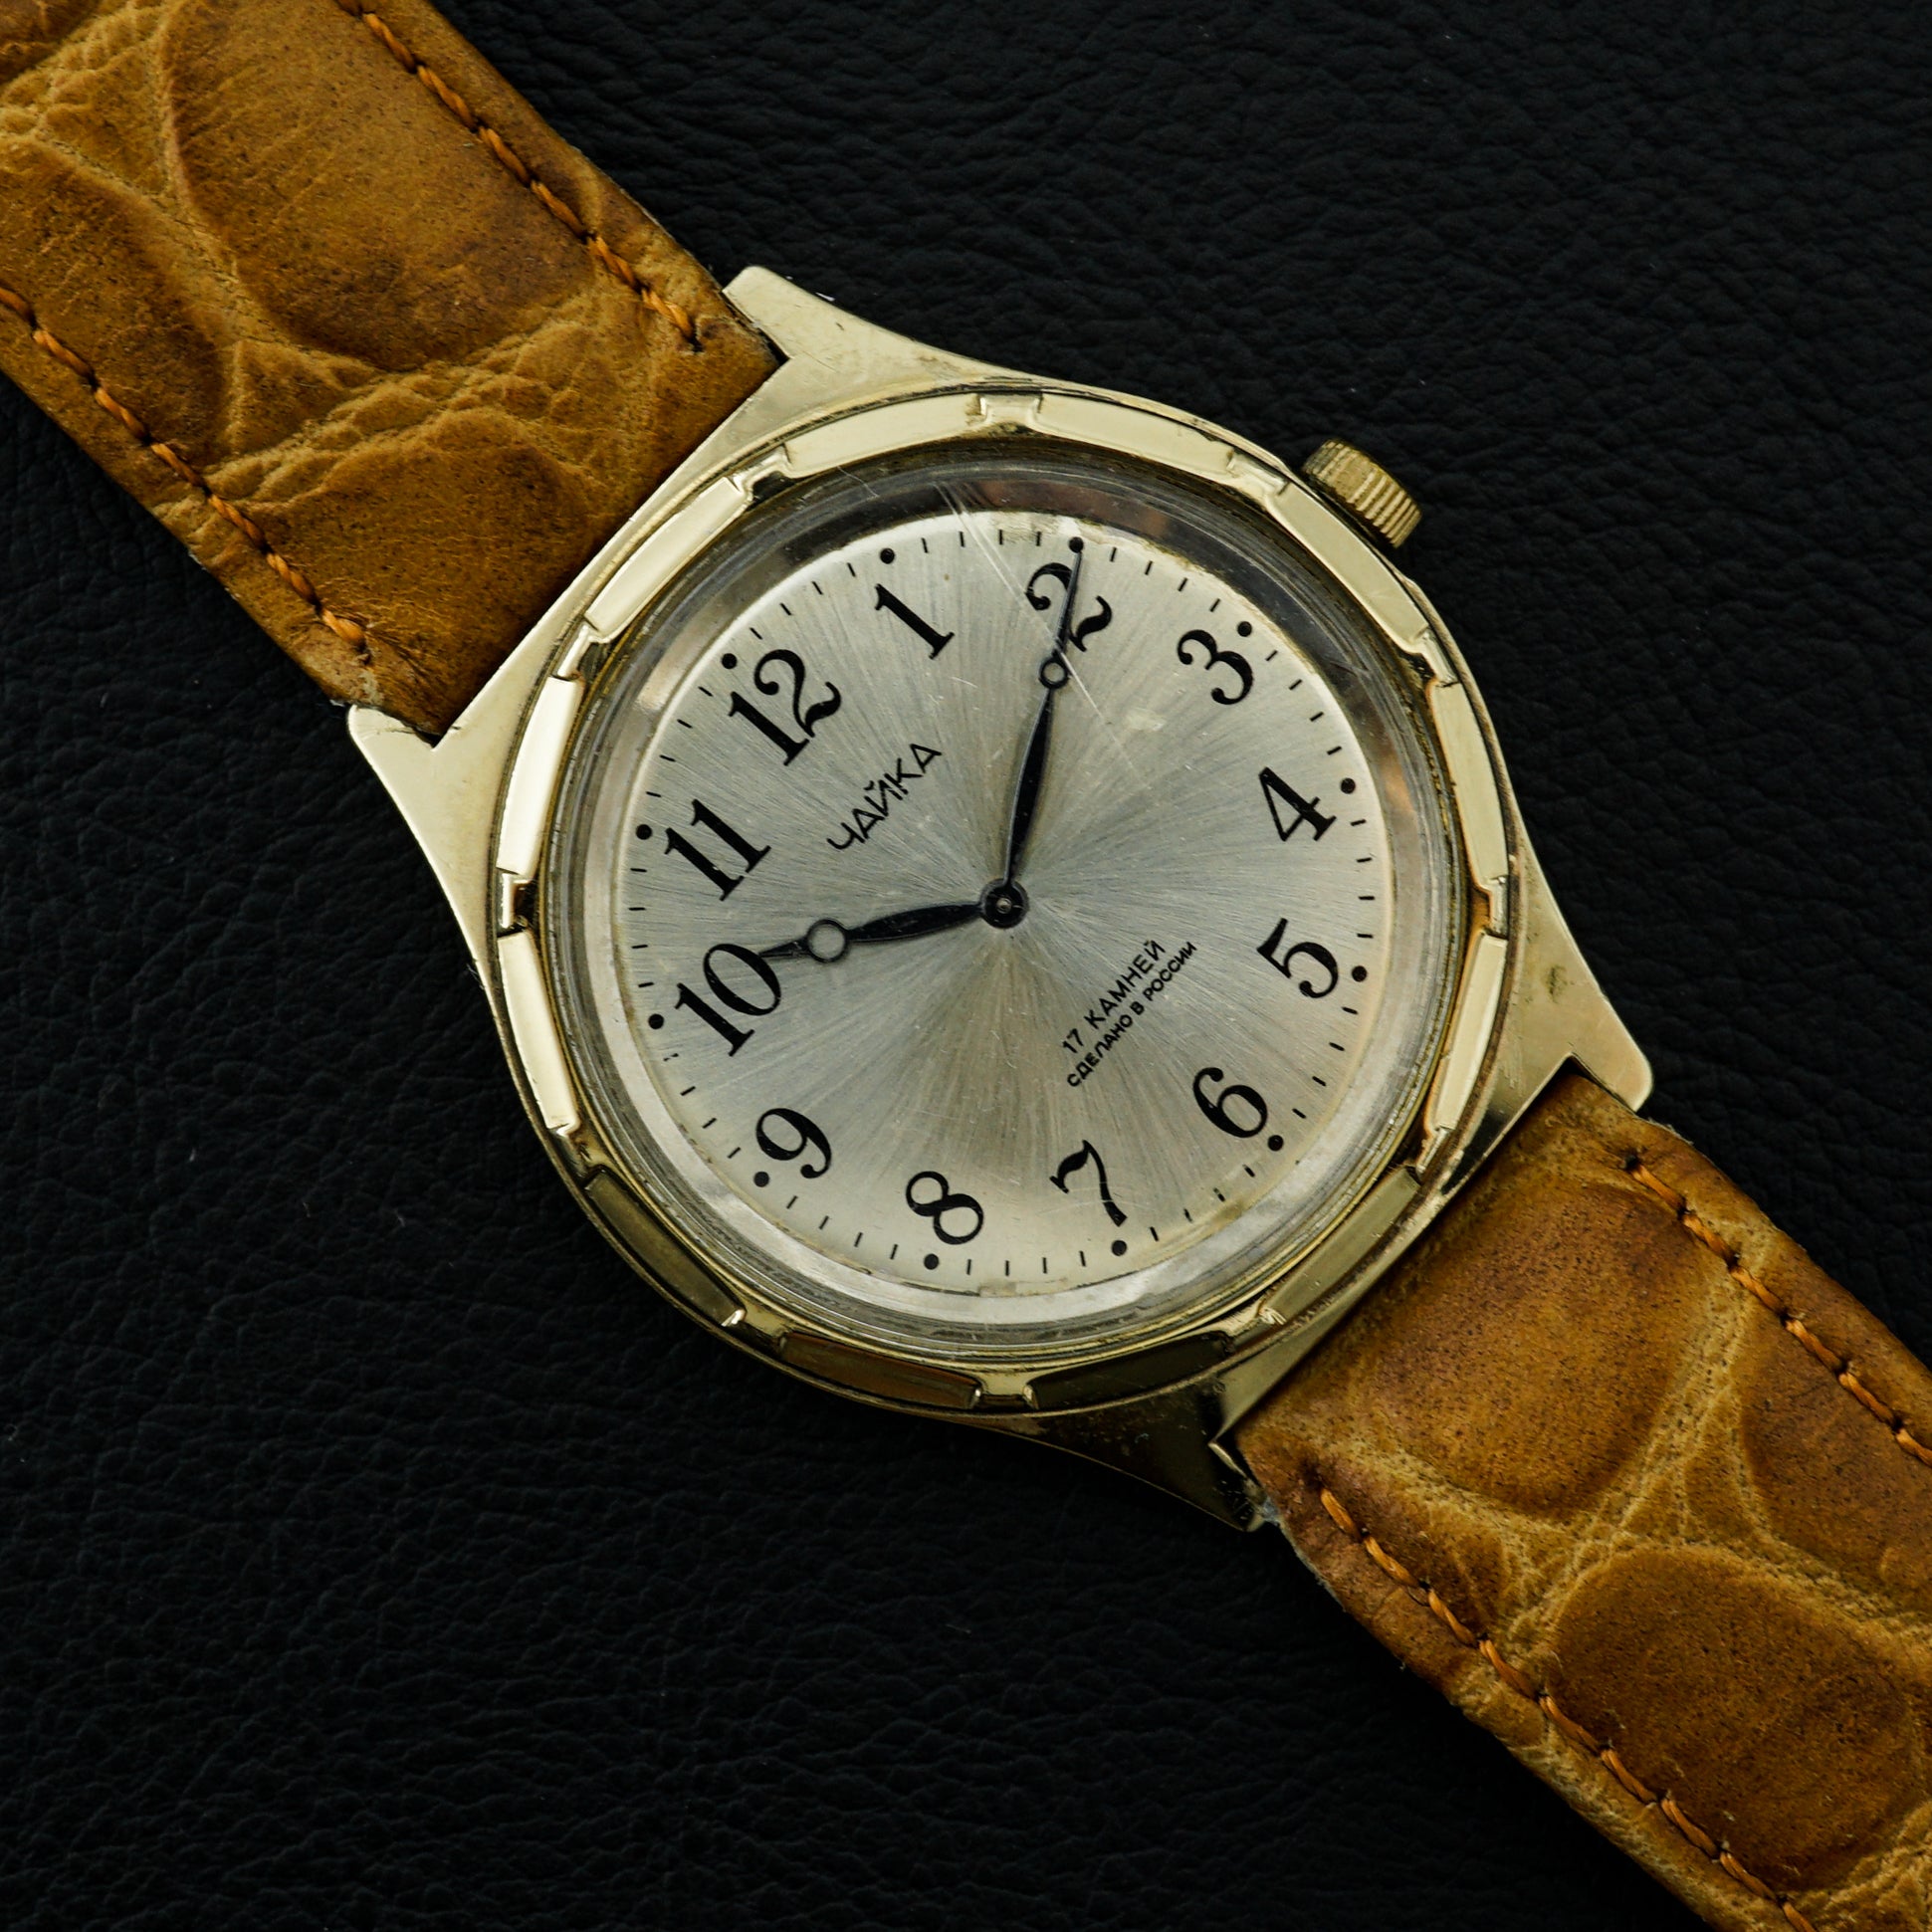 Chaika Rare Vintage USSR watch for $220 for sale from a Private Seller on  Chrono24